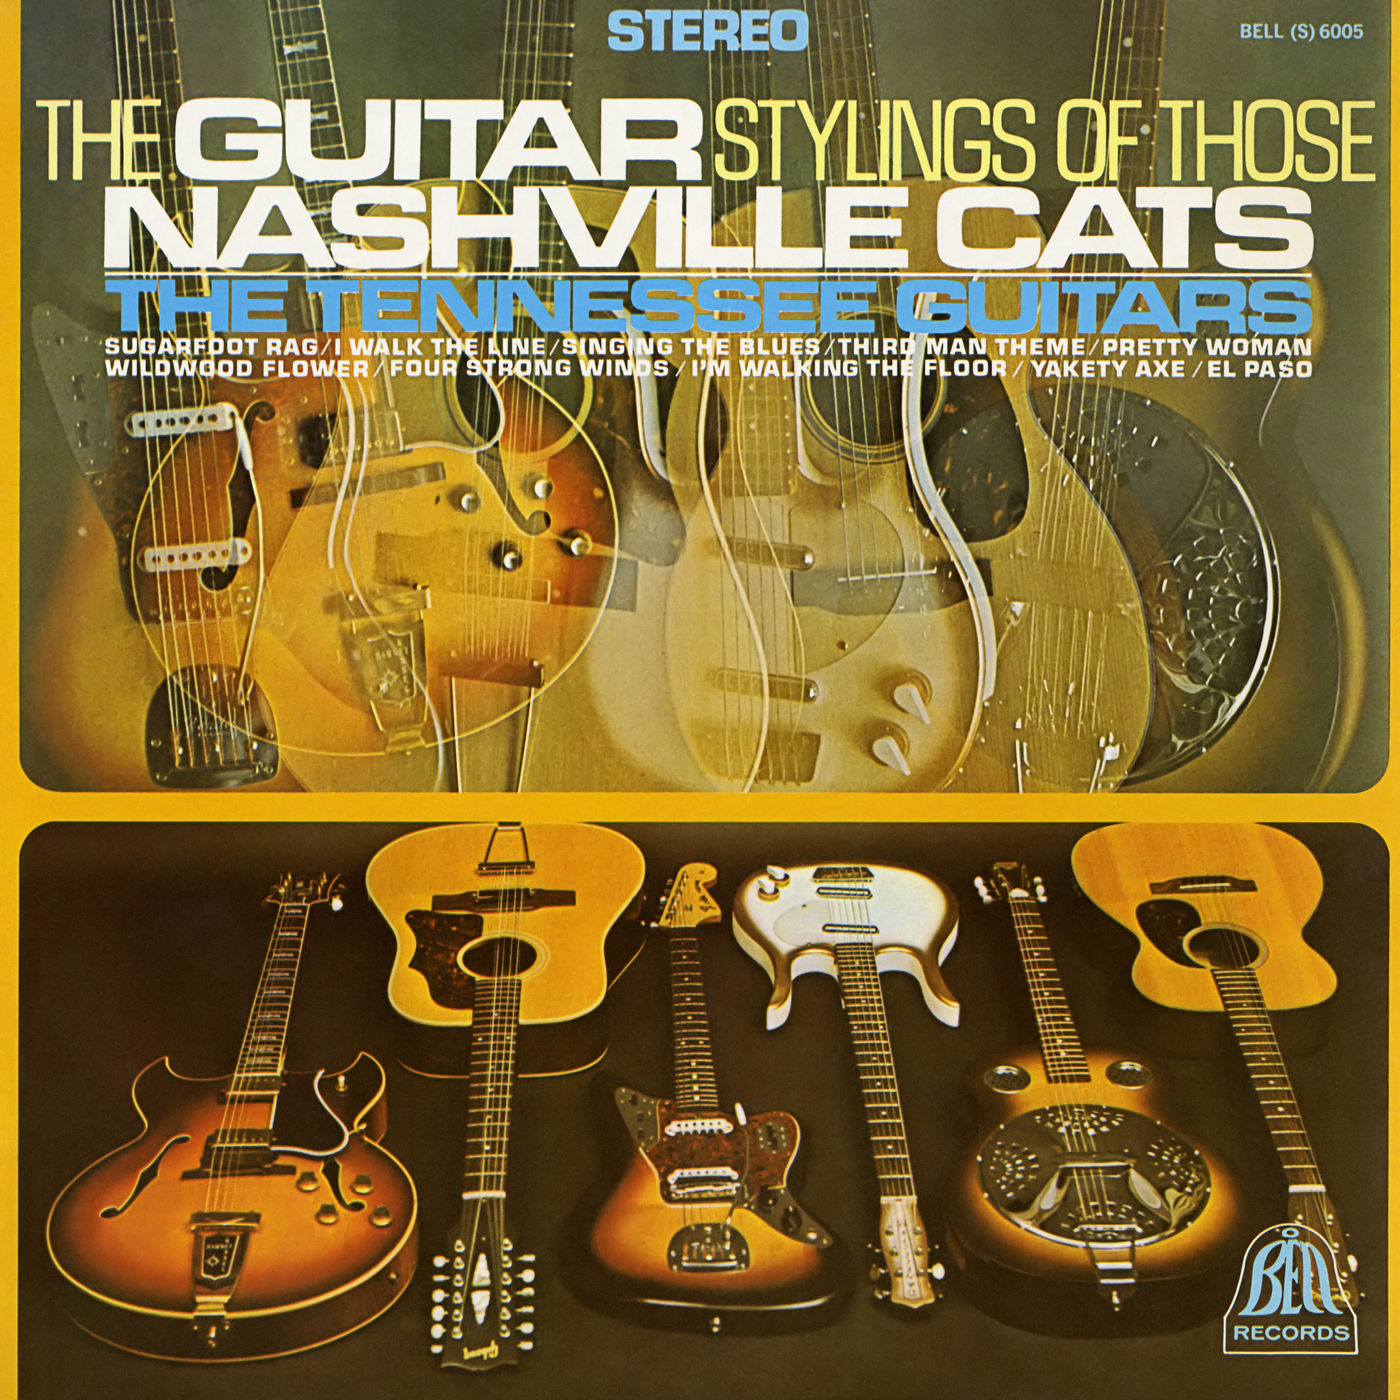 Tennessee Guitars – The Guitar Stylings of Those Nashville Cats